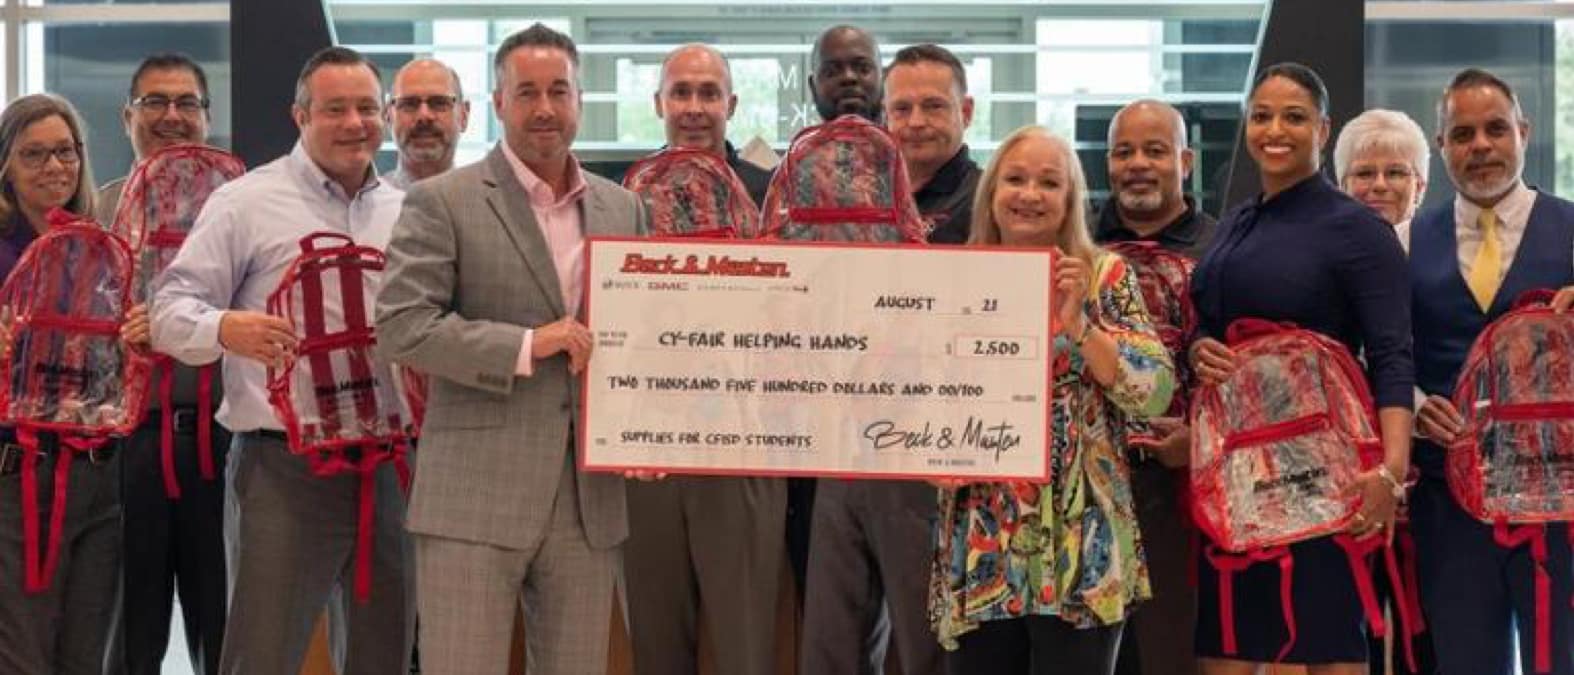 CY Fair Helping Hands group with big check